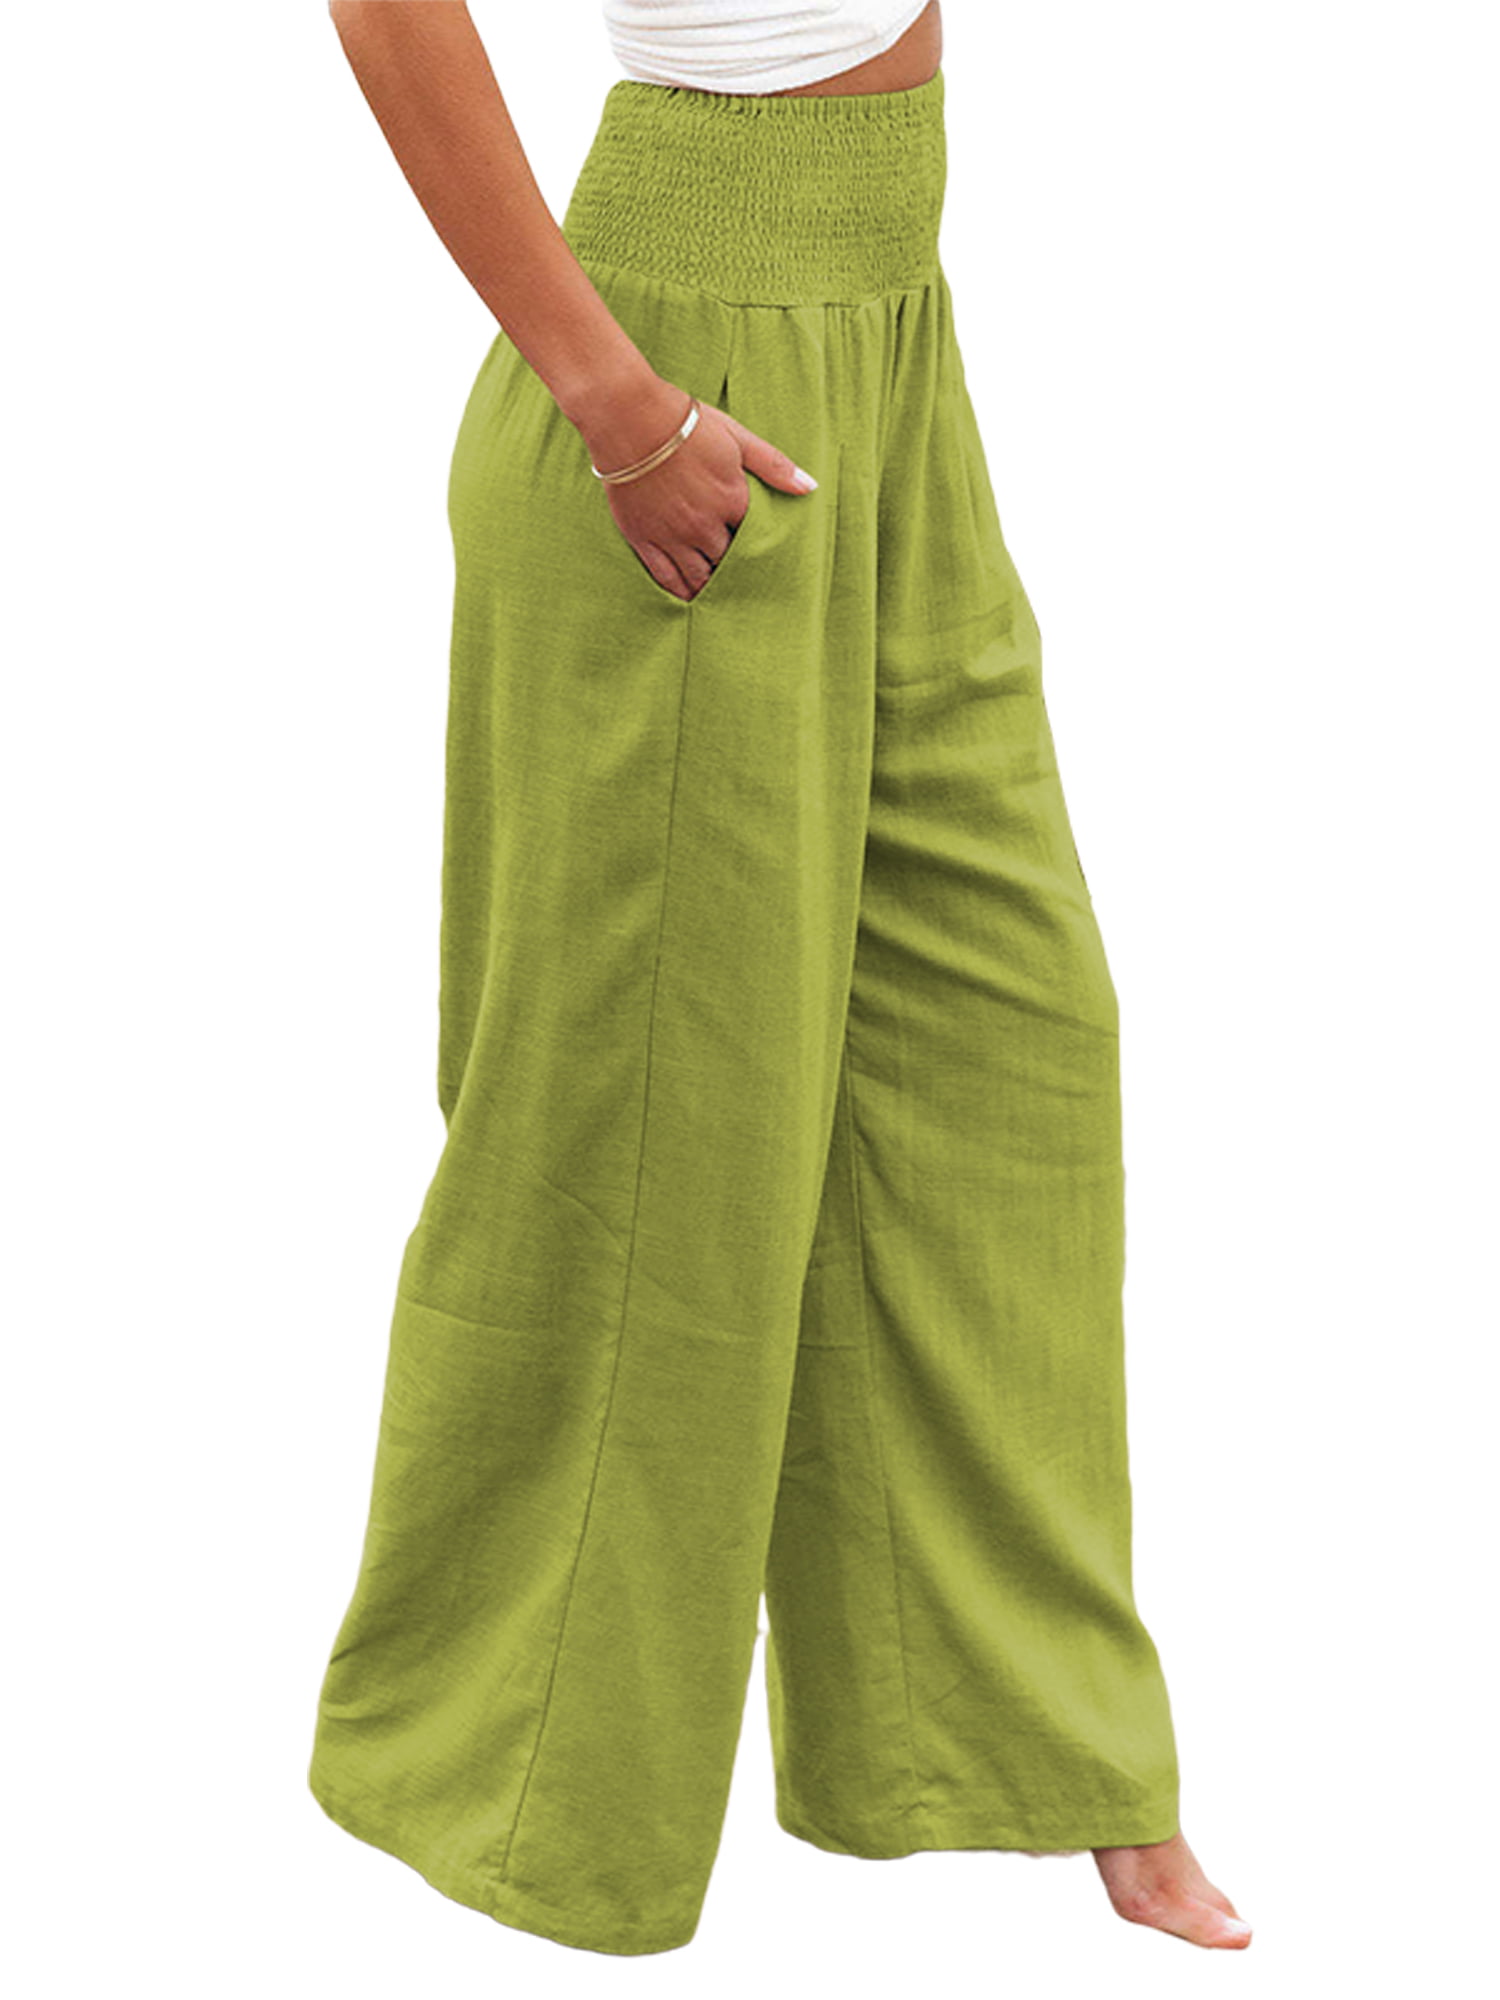 Cathalem Summer Work Pants for Women Womens Flower Prinnted Linen Capri  Pants Casual Two Piece Outfits for Women Pants Set Pants Green X-Large 